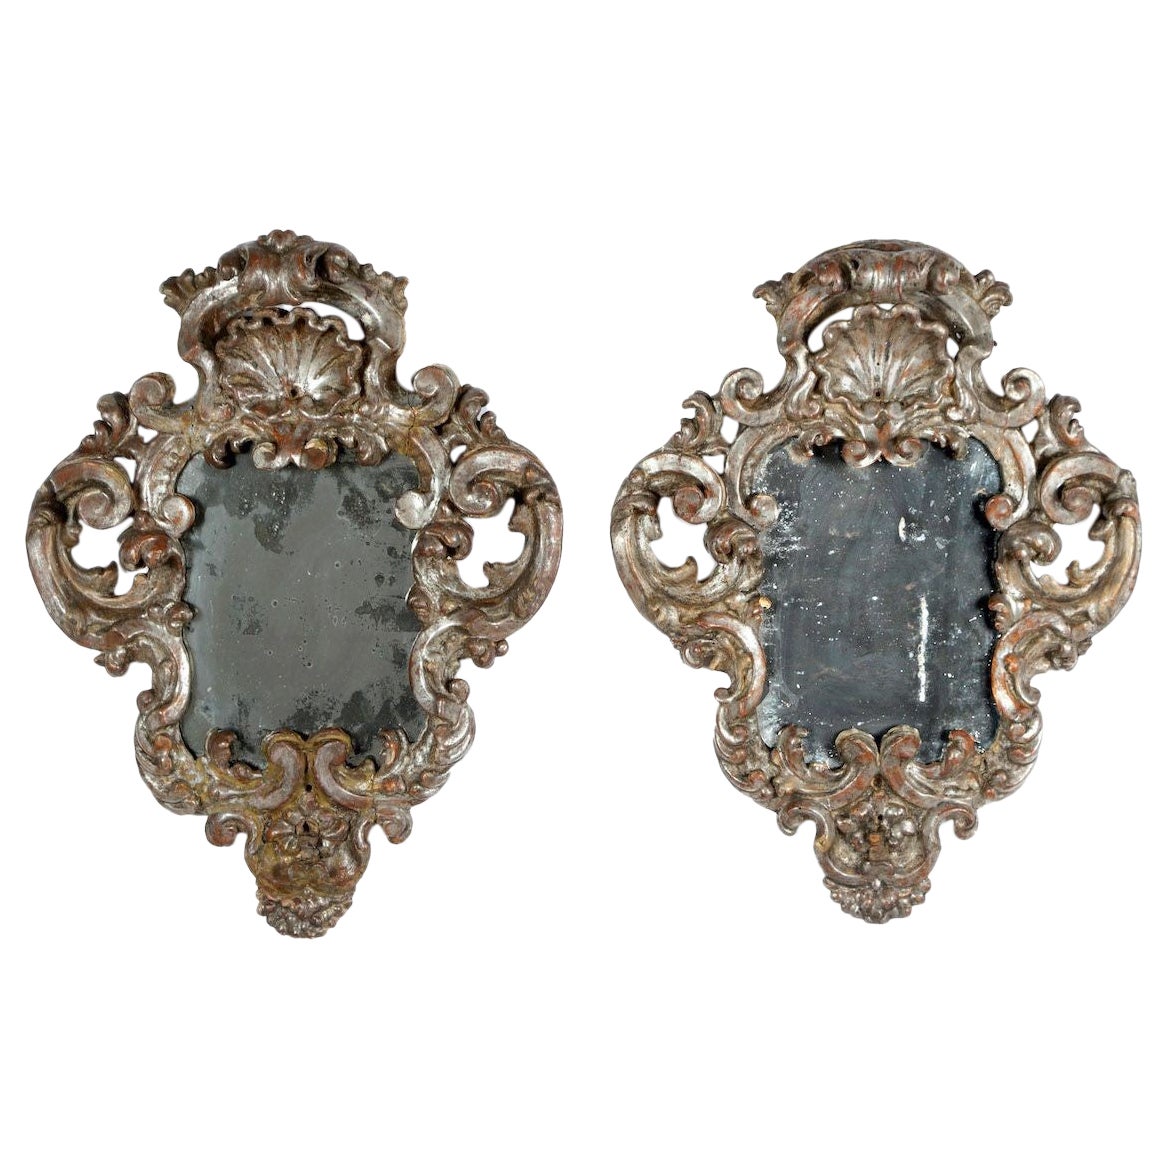 18th c. Pair Italian Baroque Mirrors with Original Silver Leaf and Mirror Plates For Sale